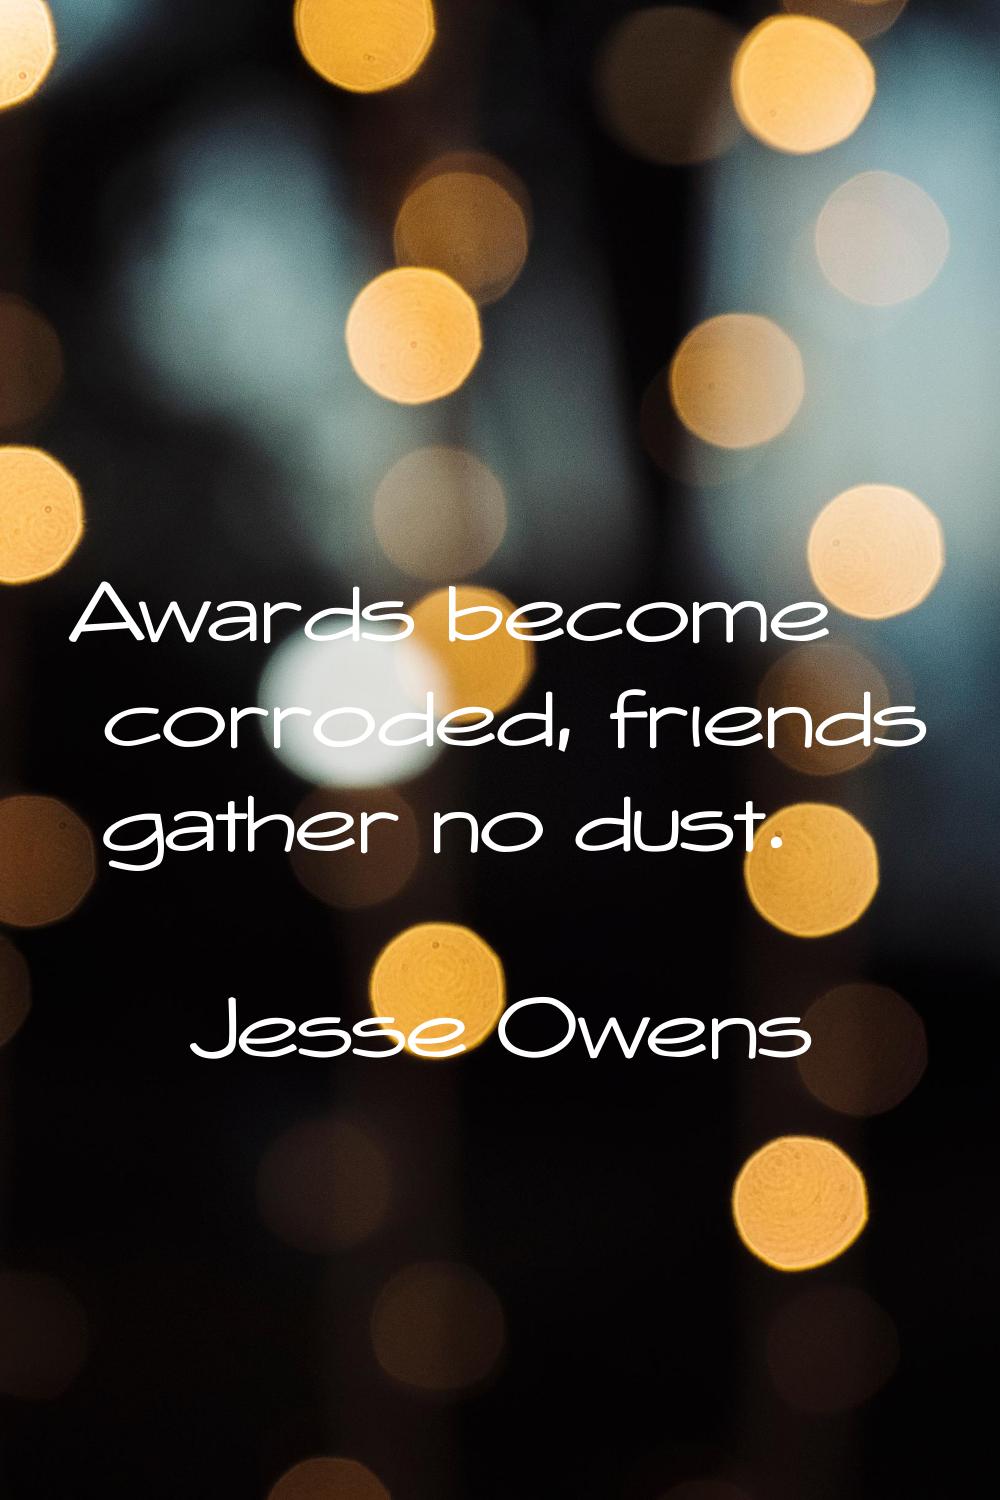 Awards become corroded, friends gather no dust.